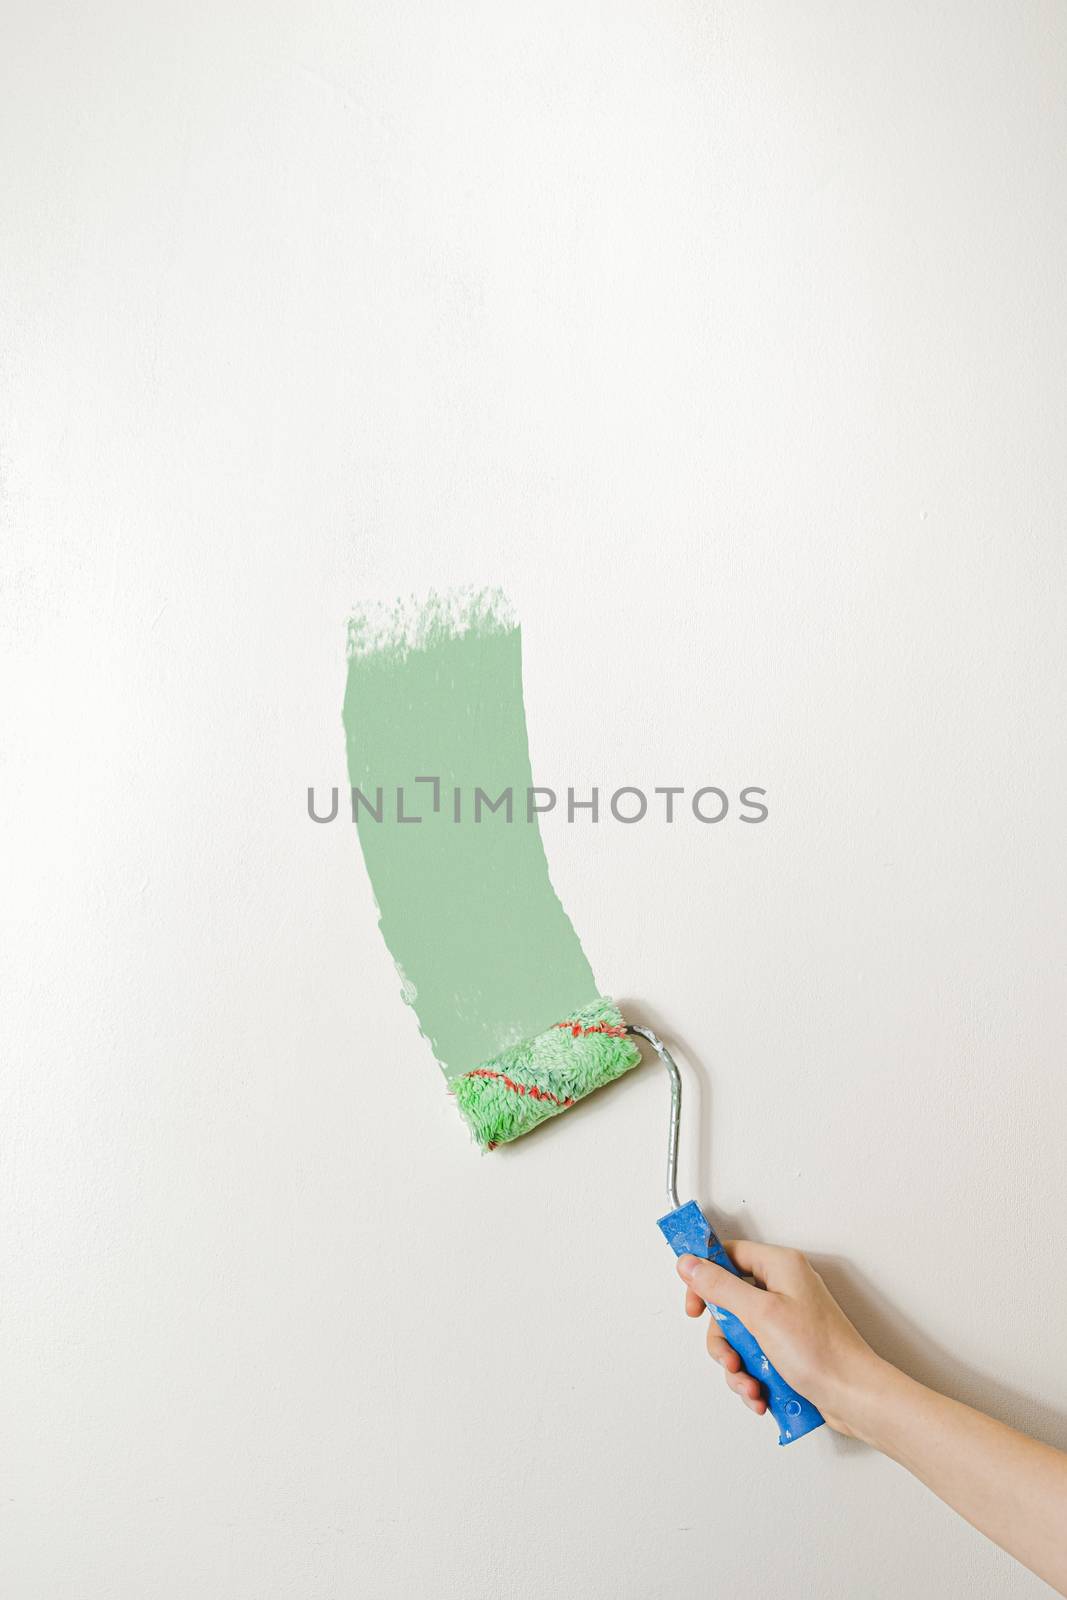 Hand with a paintbrush against the white wall. Redecorating, renovating the room or the living space, starting out new life concept